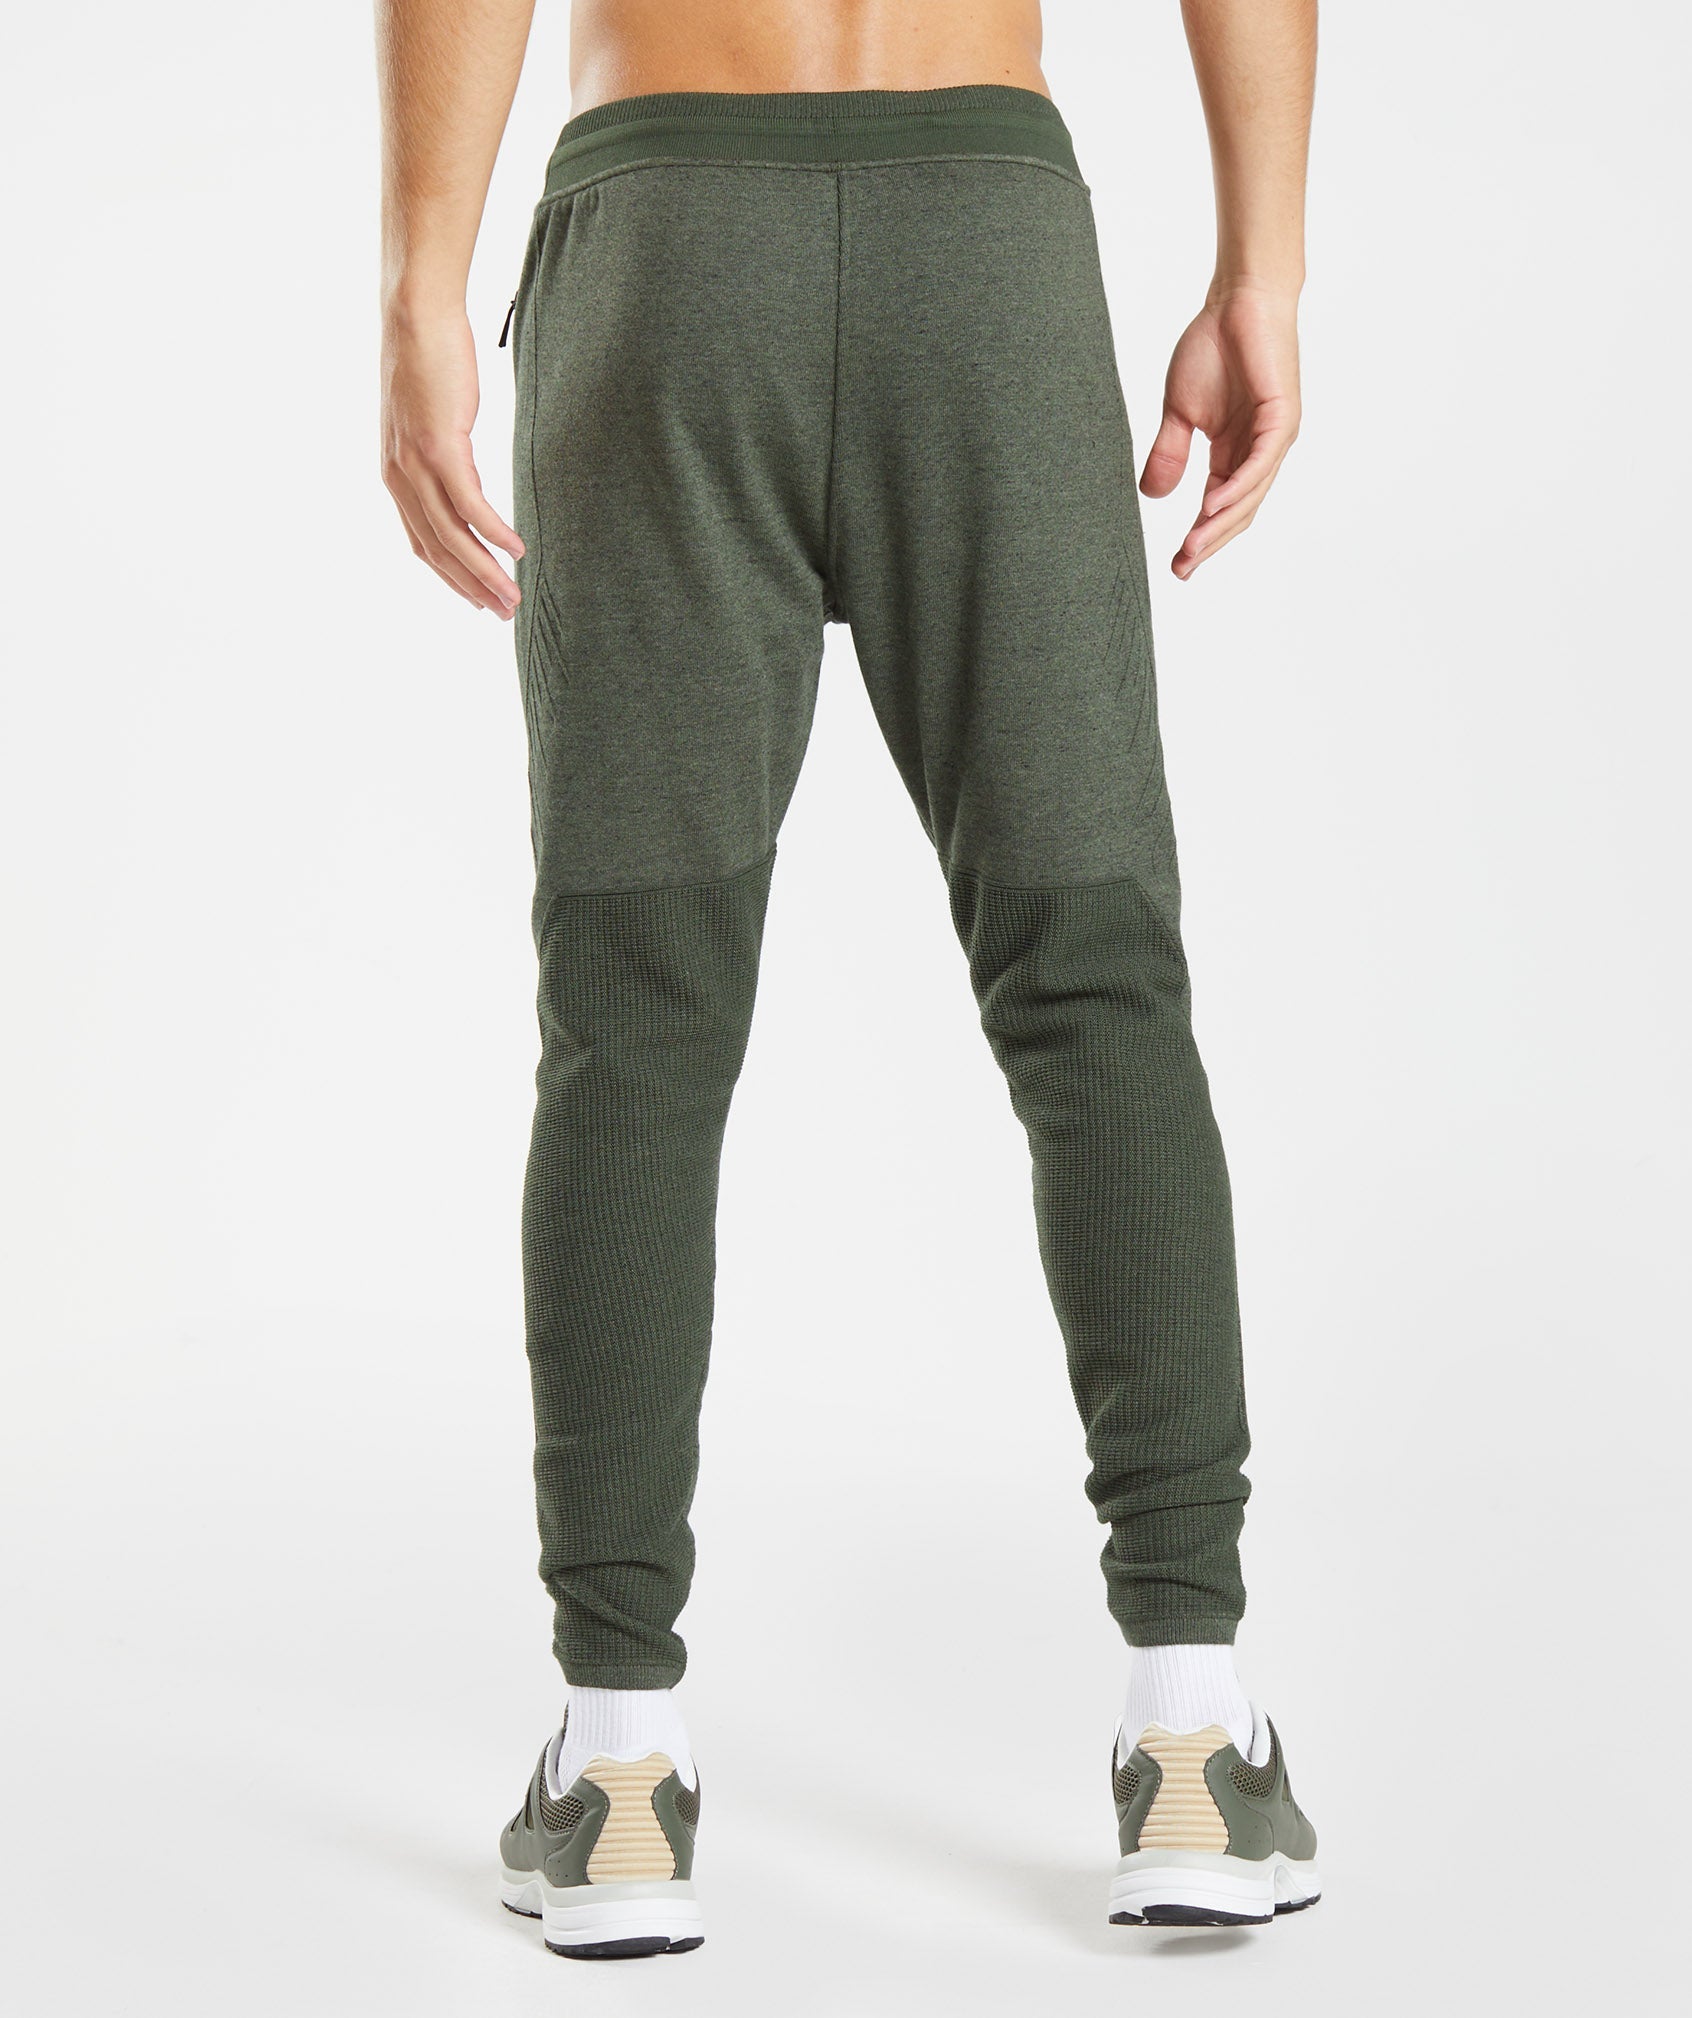 Retake Knit Joggers in Moss Olive Marl - view 2